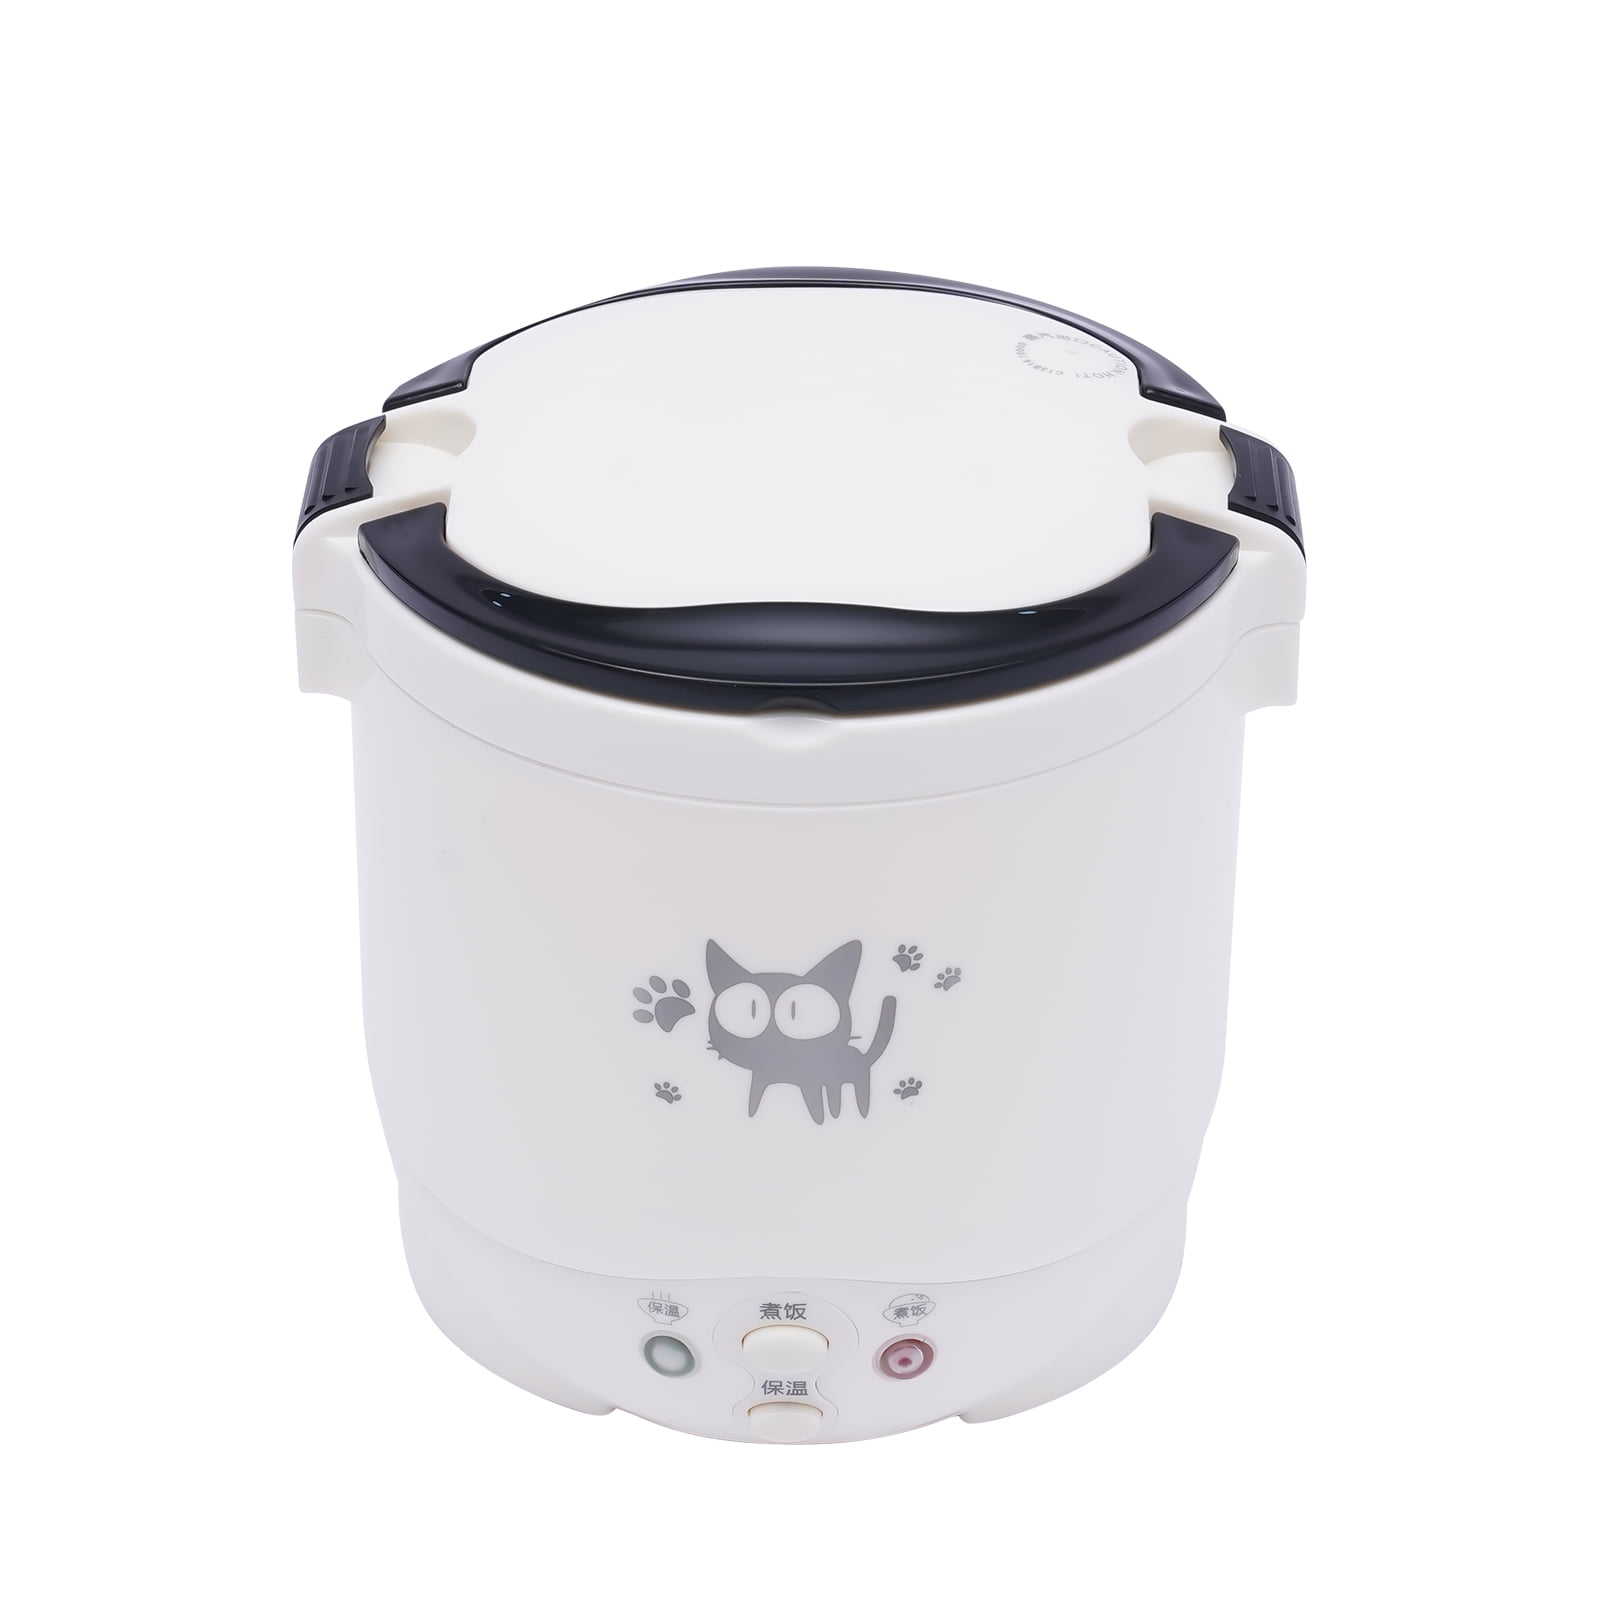 Rice Cooker & Warmer Steam Multibook my mode Small size for personal  kitchen homeware